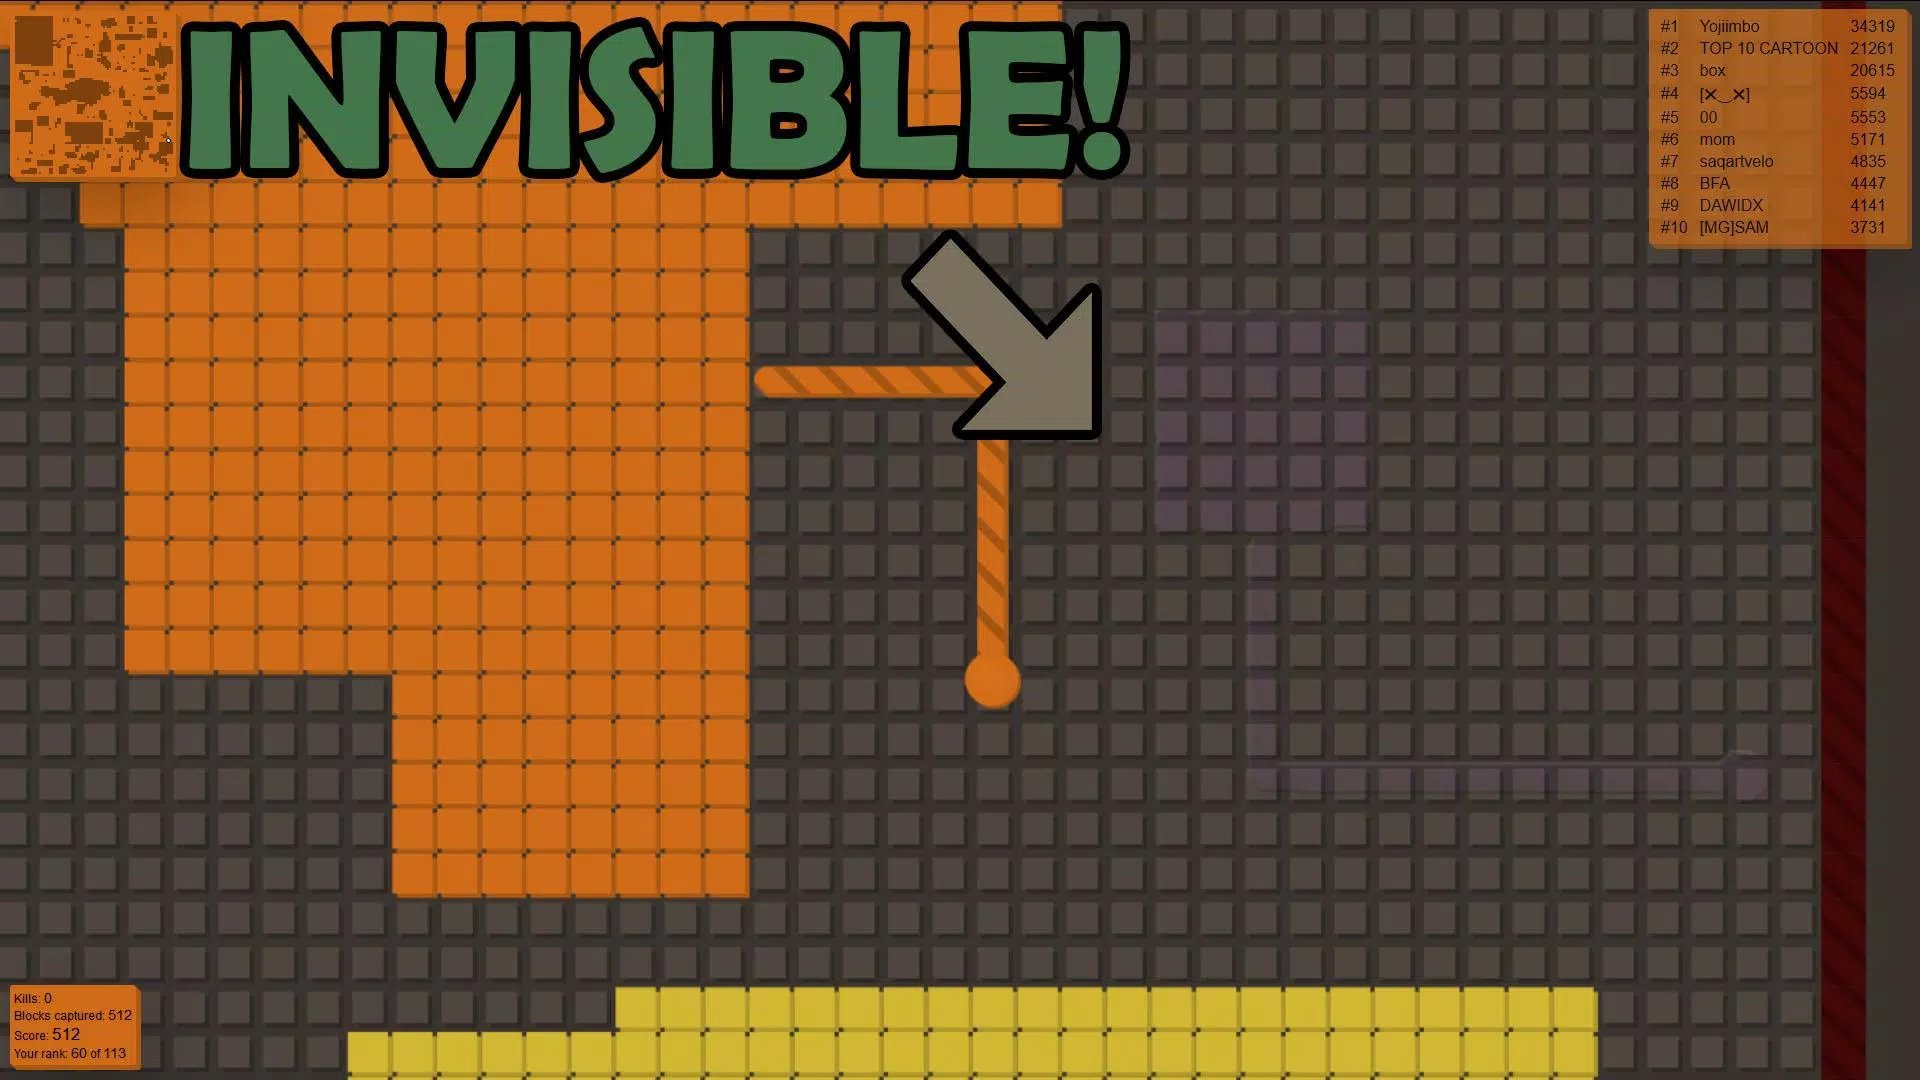 Invisible Skin For Splix.io APK + Mod for Android.